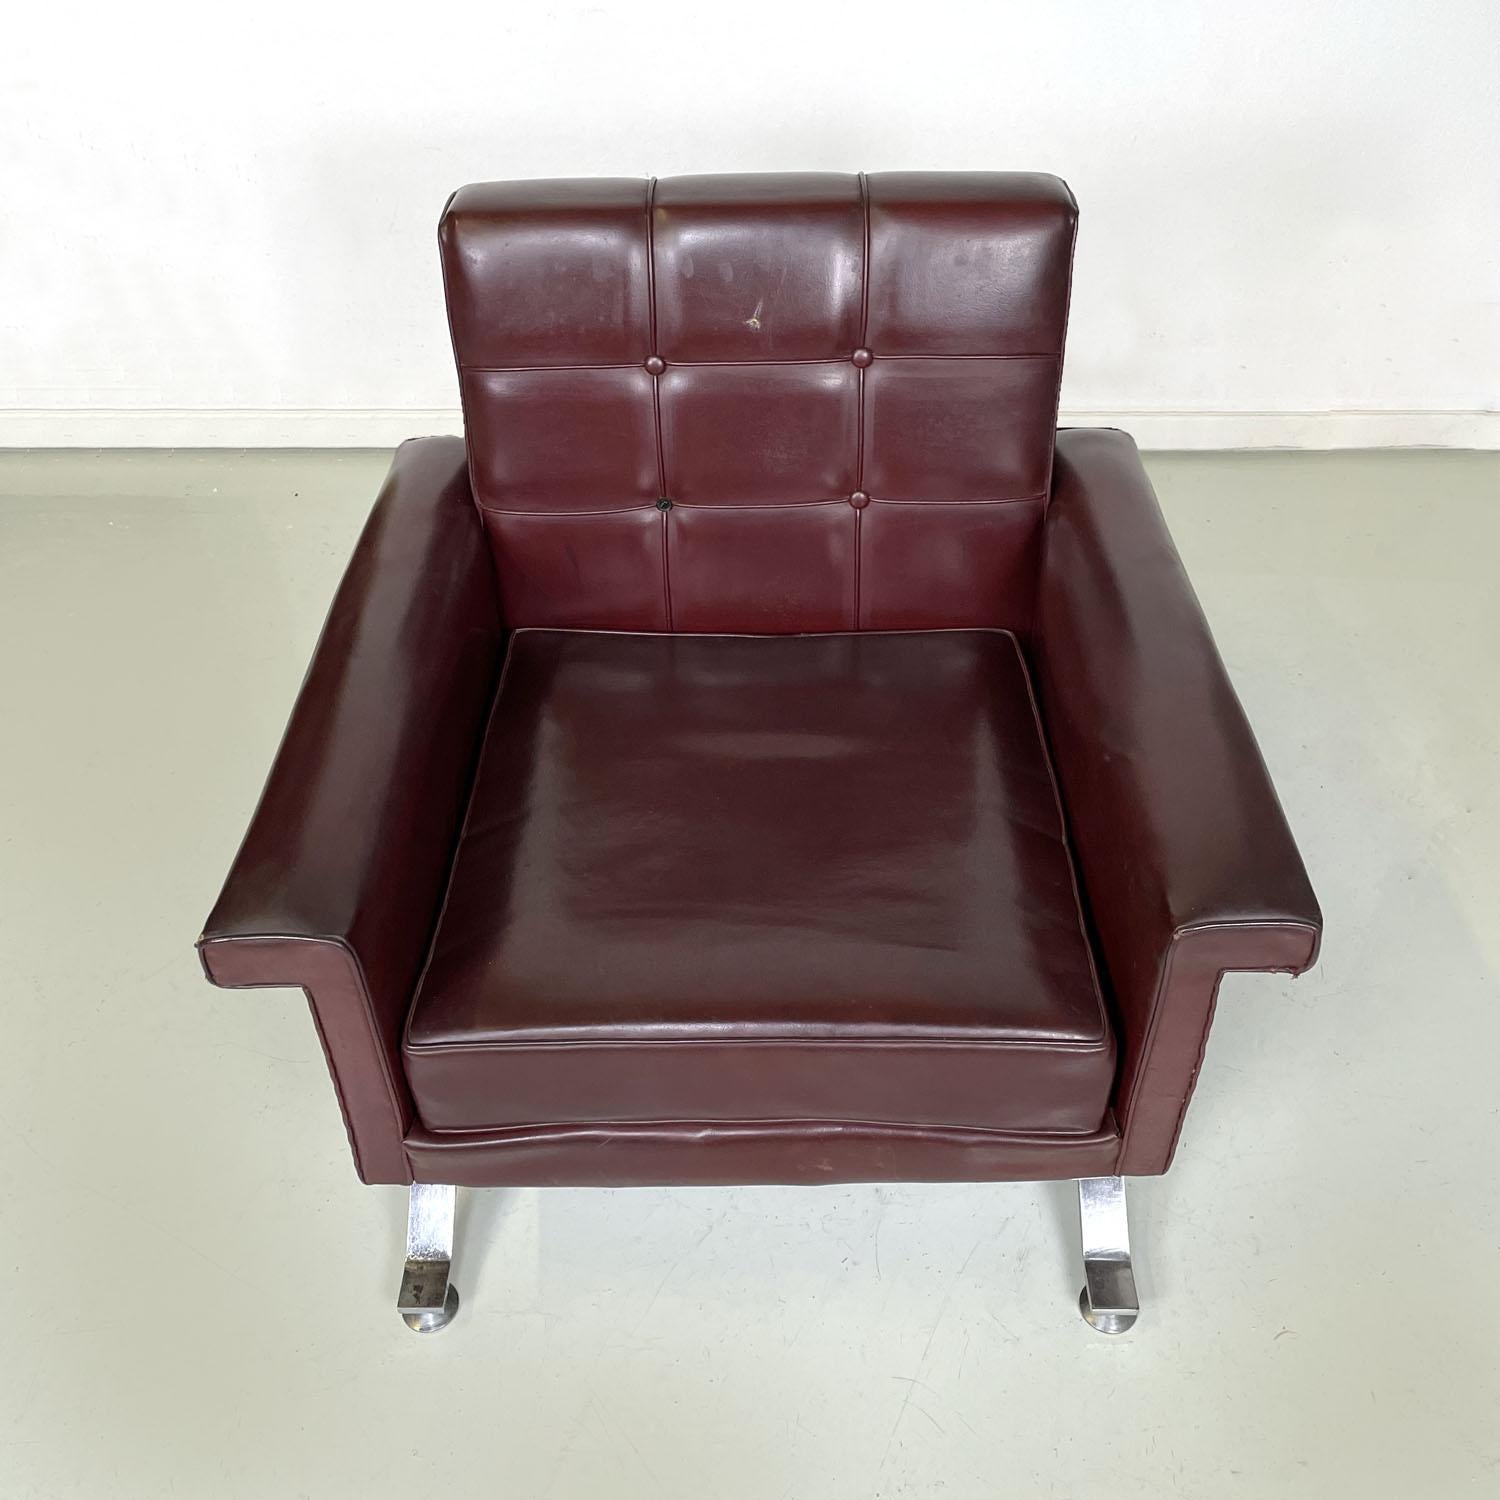 Italian mid-century modern leather armchairs by Ico Parisi for Cassina, 1960s For Sale 1